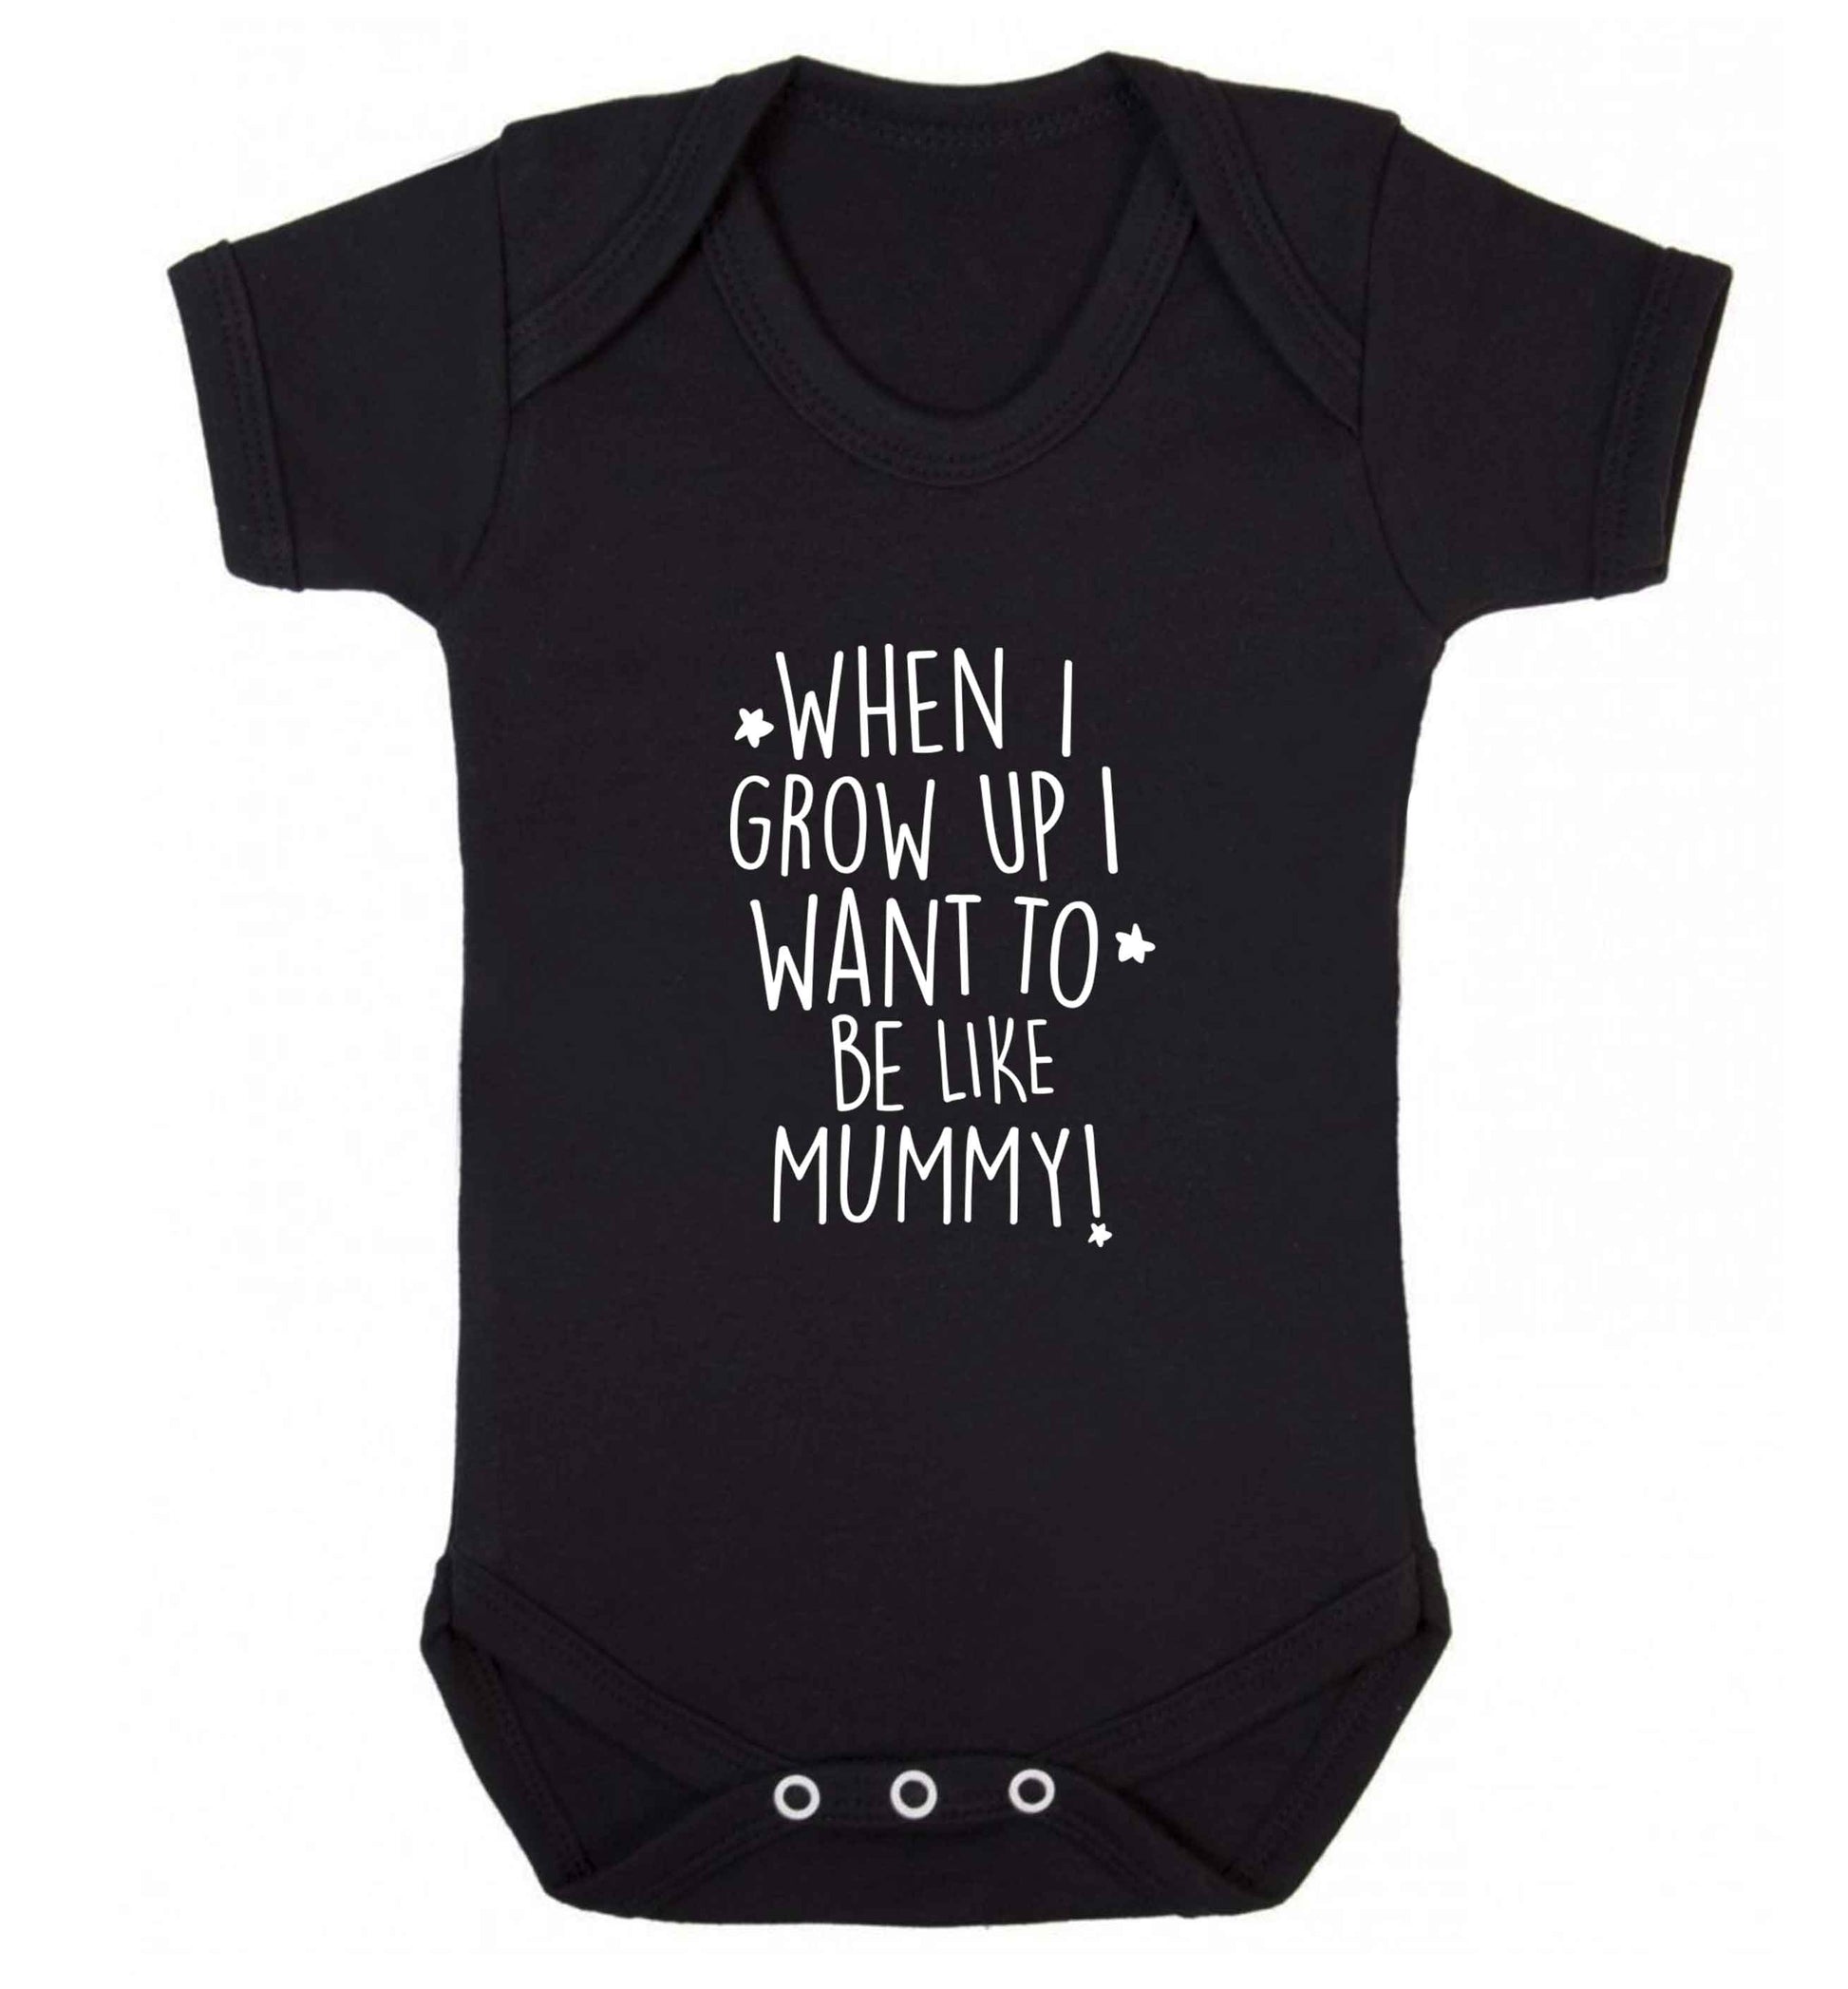 When I grow up I want to be like my mummy baby vest black 18-24 months